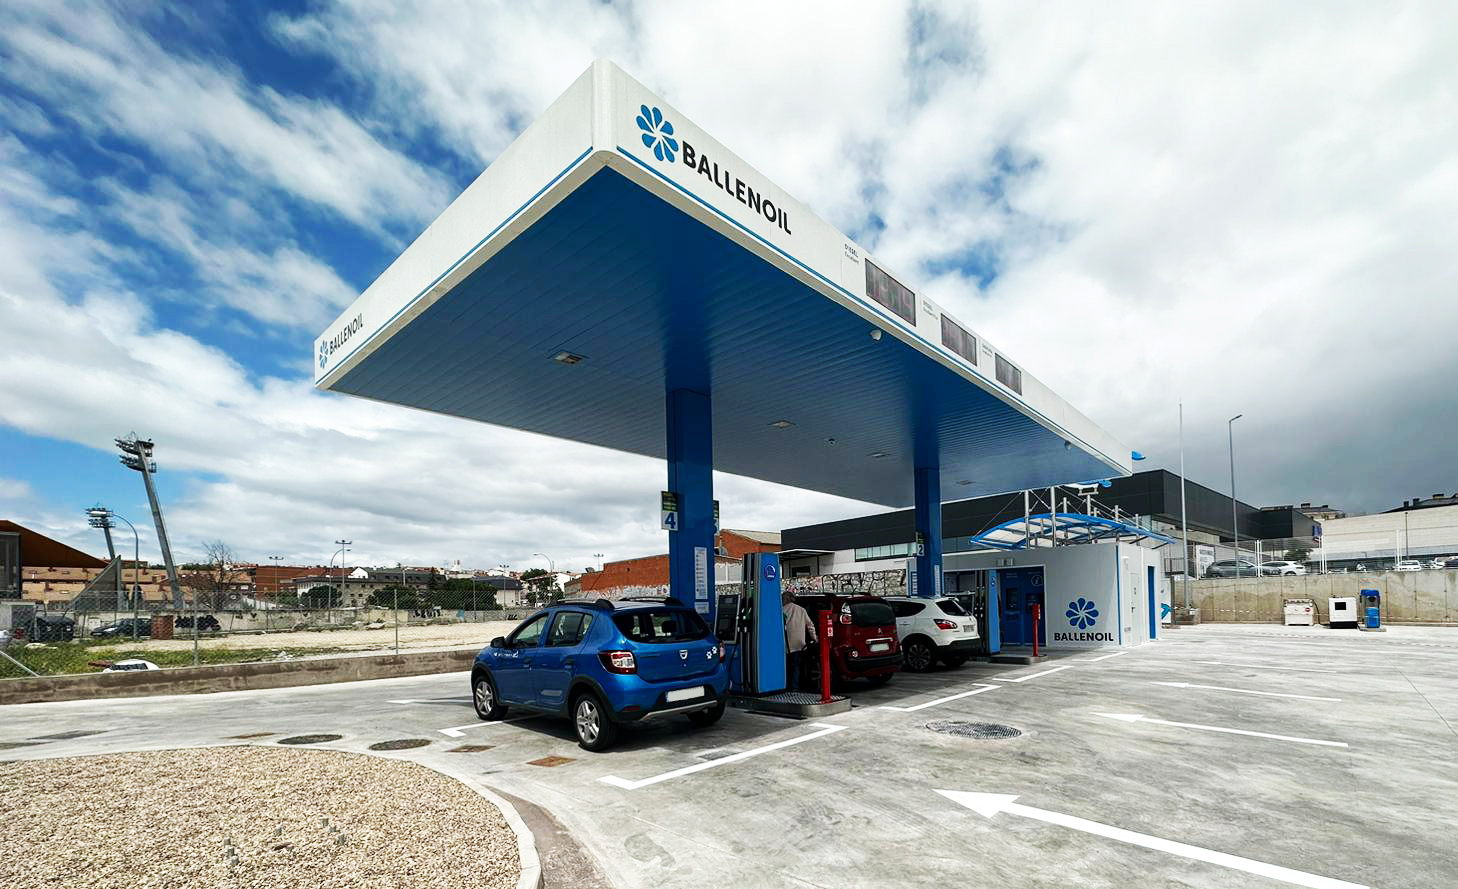 REVEALED: These are the cheapest areas to fill up your car with petrol across Malaga province  including Fuengirola, Mijas and Antequera [Video]